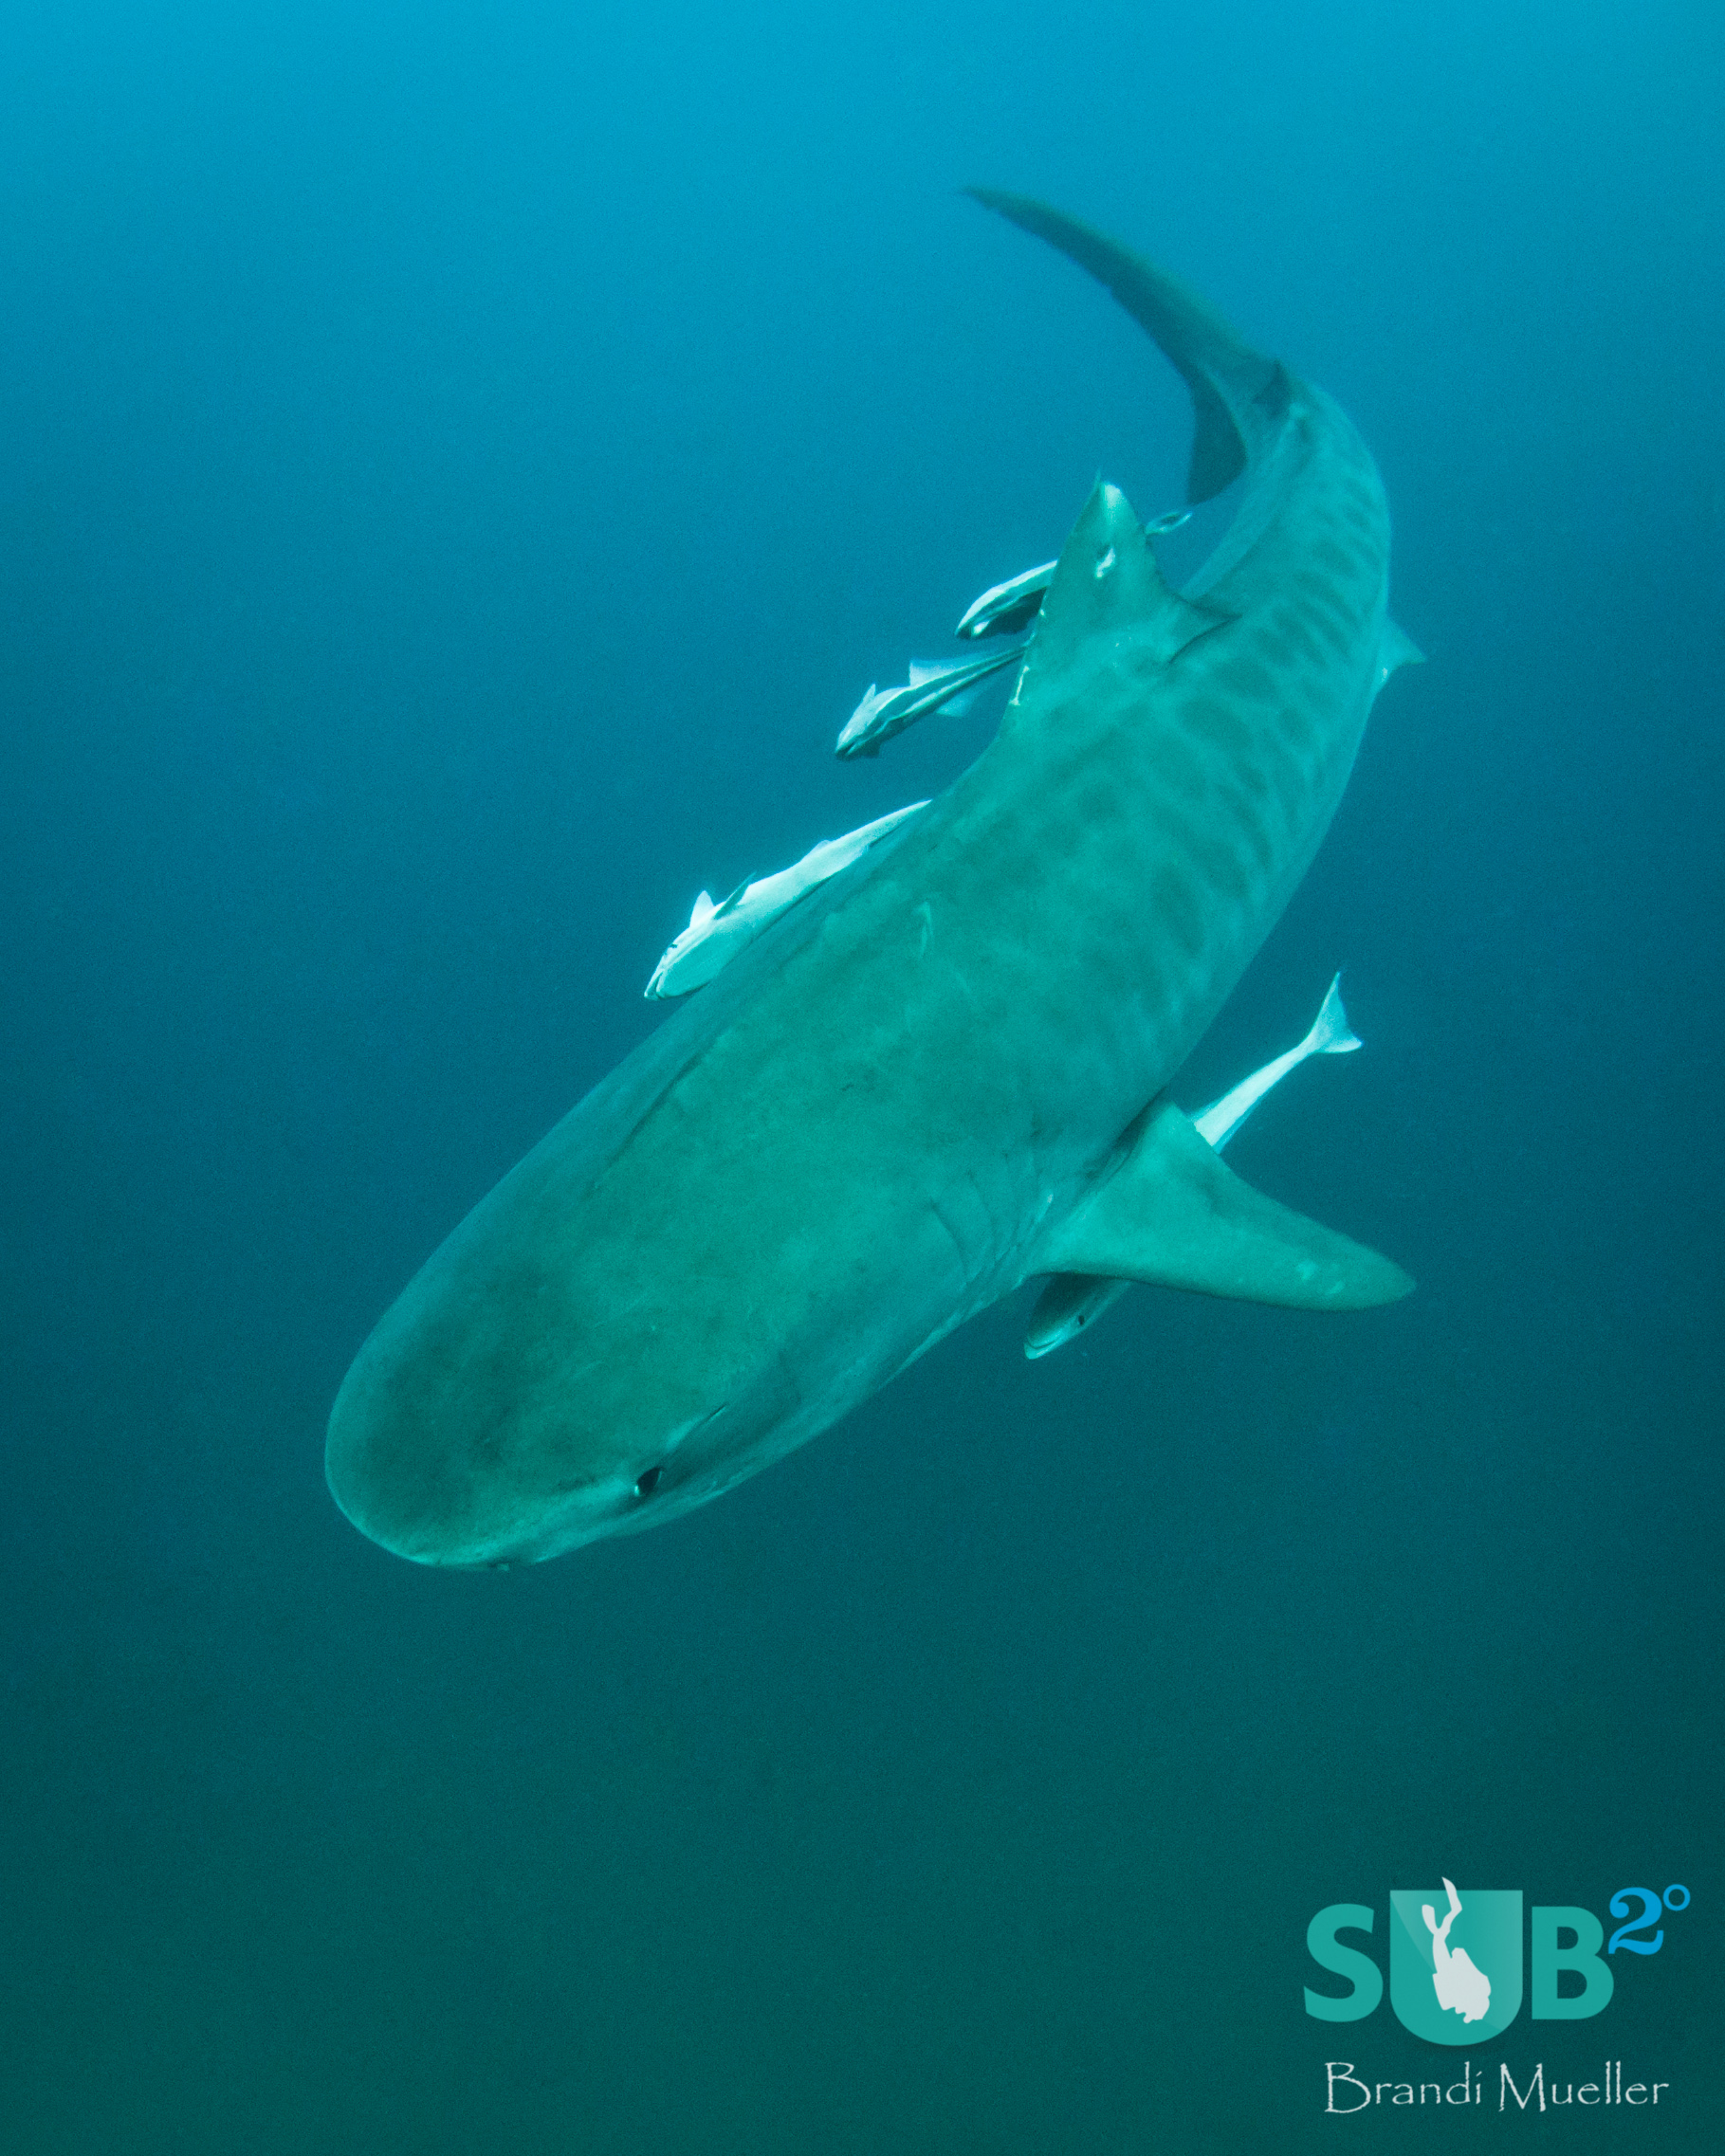 Tiger Beach is a Mecca for tiger sharks. You'll find them gracefully circling around you.